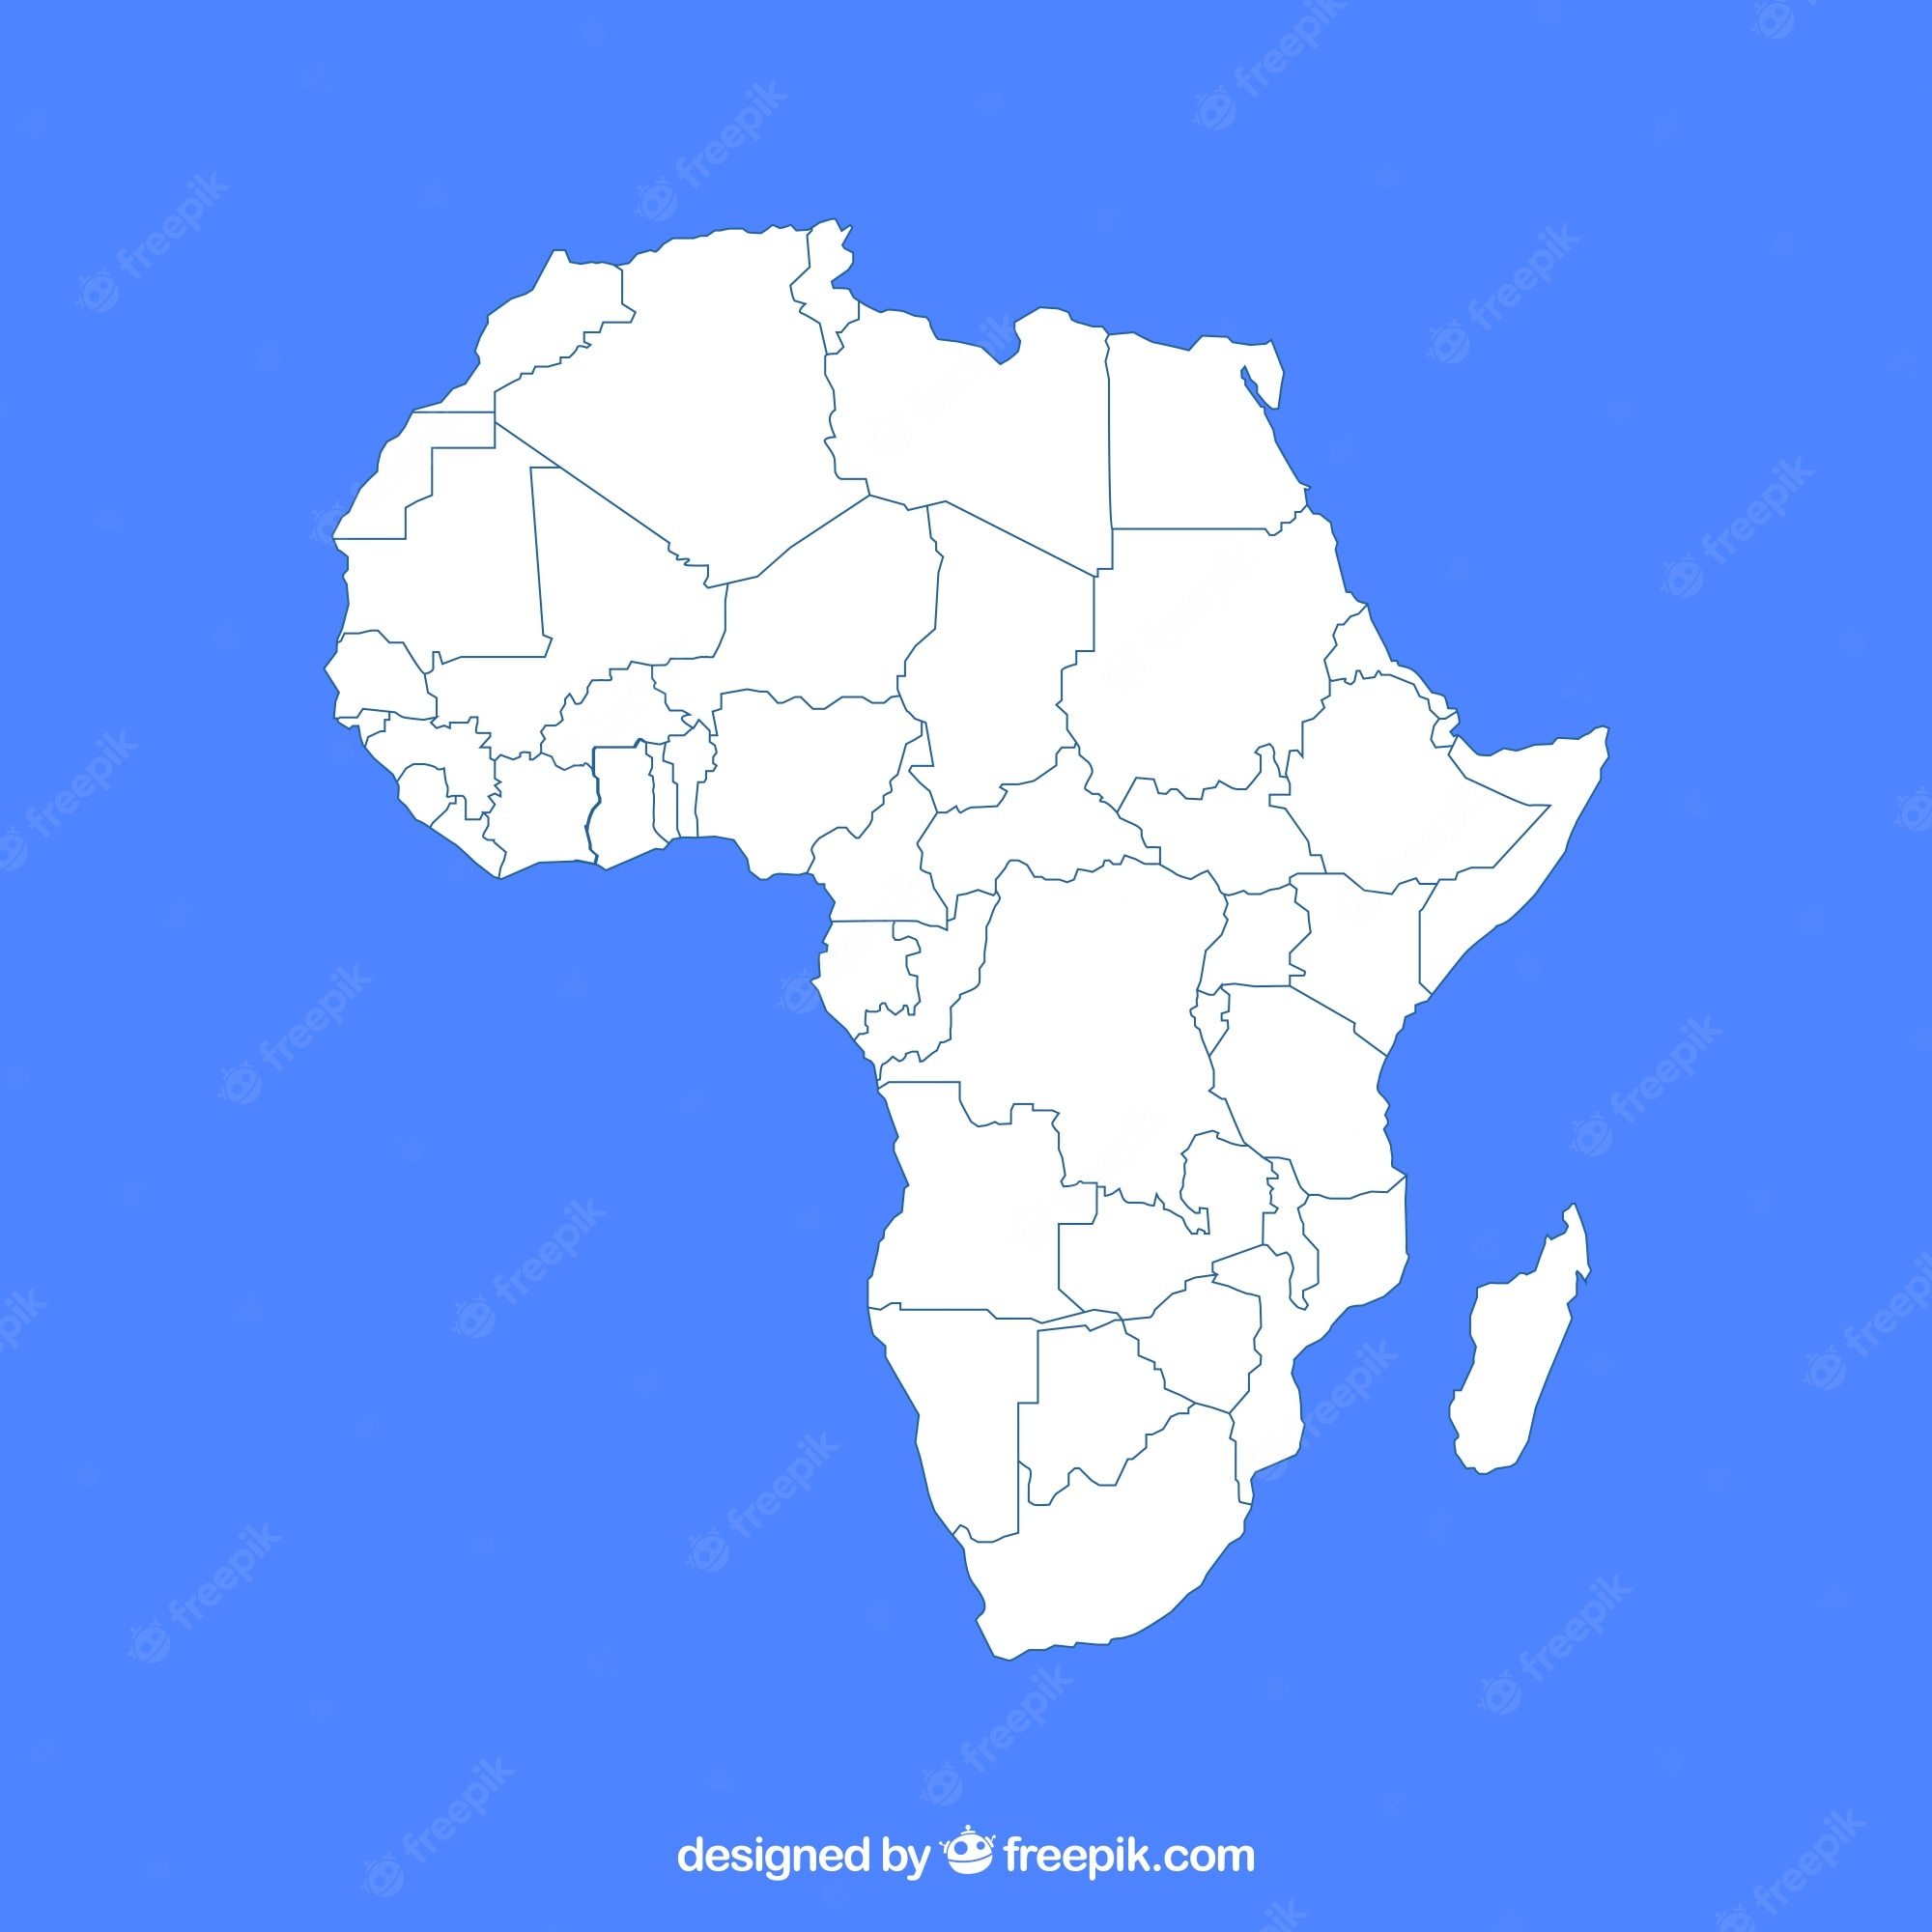 countries in africa - Year 9 - Quizizz